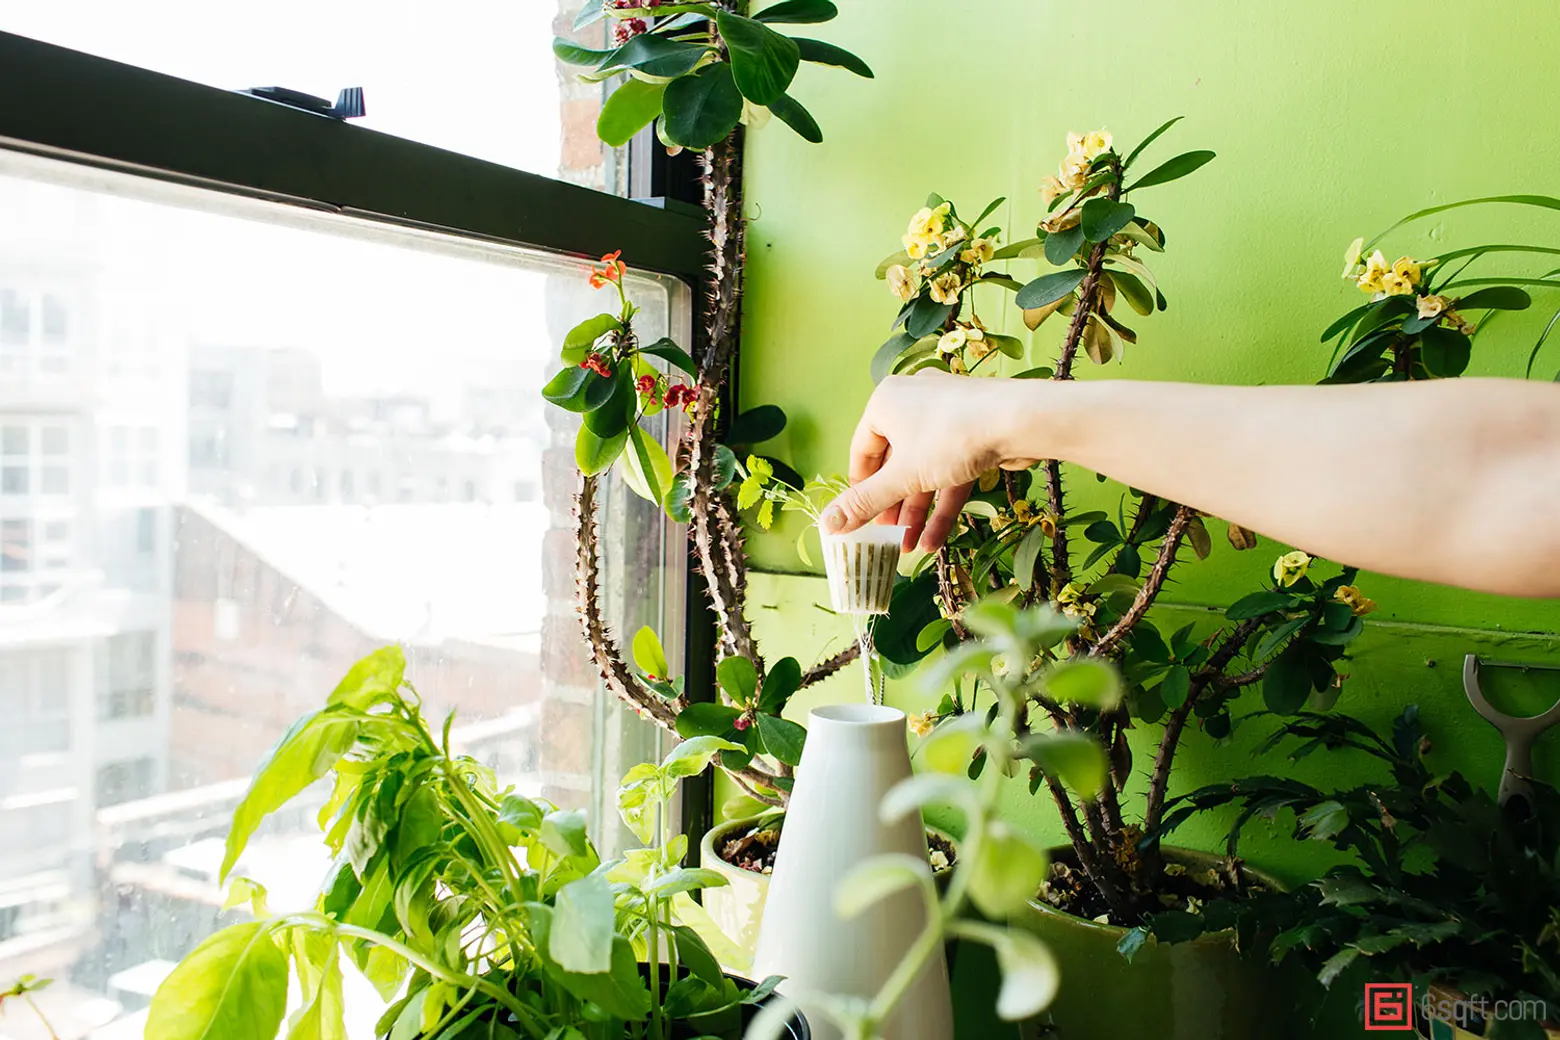 Model Summer Rayne Oakes, plant-filled apartments, Model Summer Rayne Oakes apartment, eco Model, Summer Rayne Oakes, model apartments, plant inspiration, how to grow plants indoors, best plants for apartments, williamsburg lofts